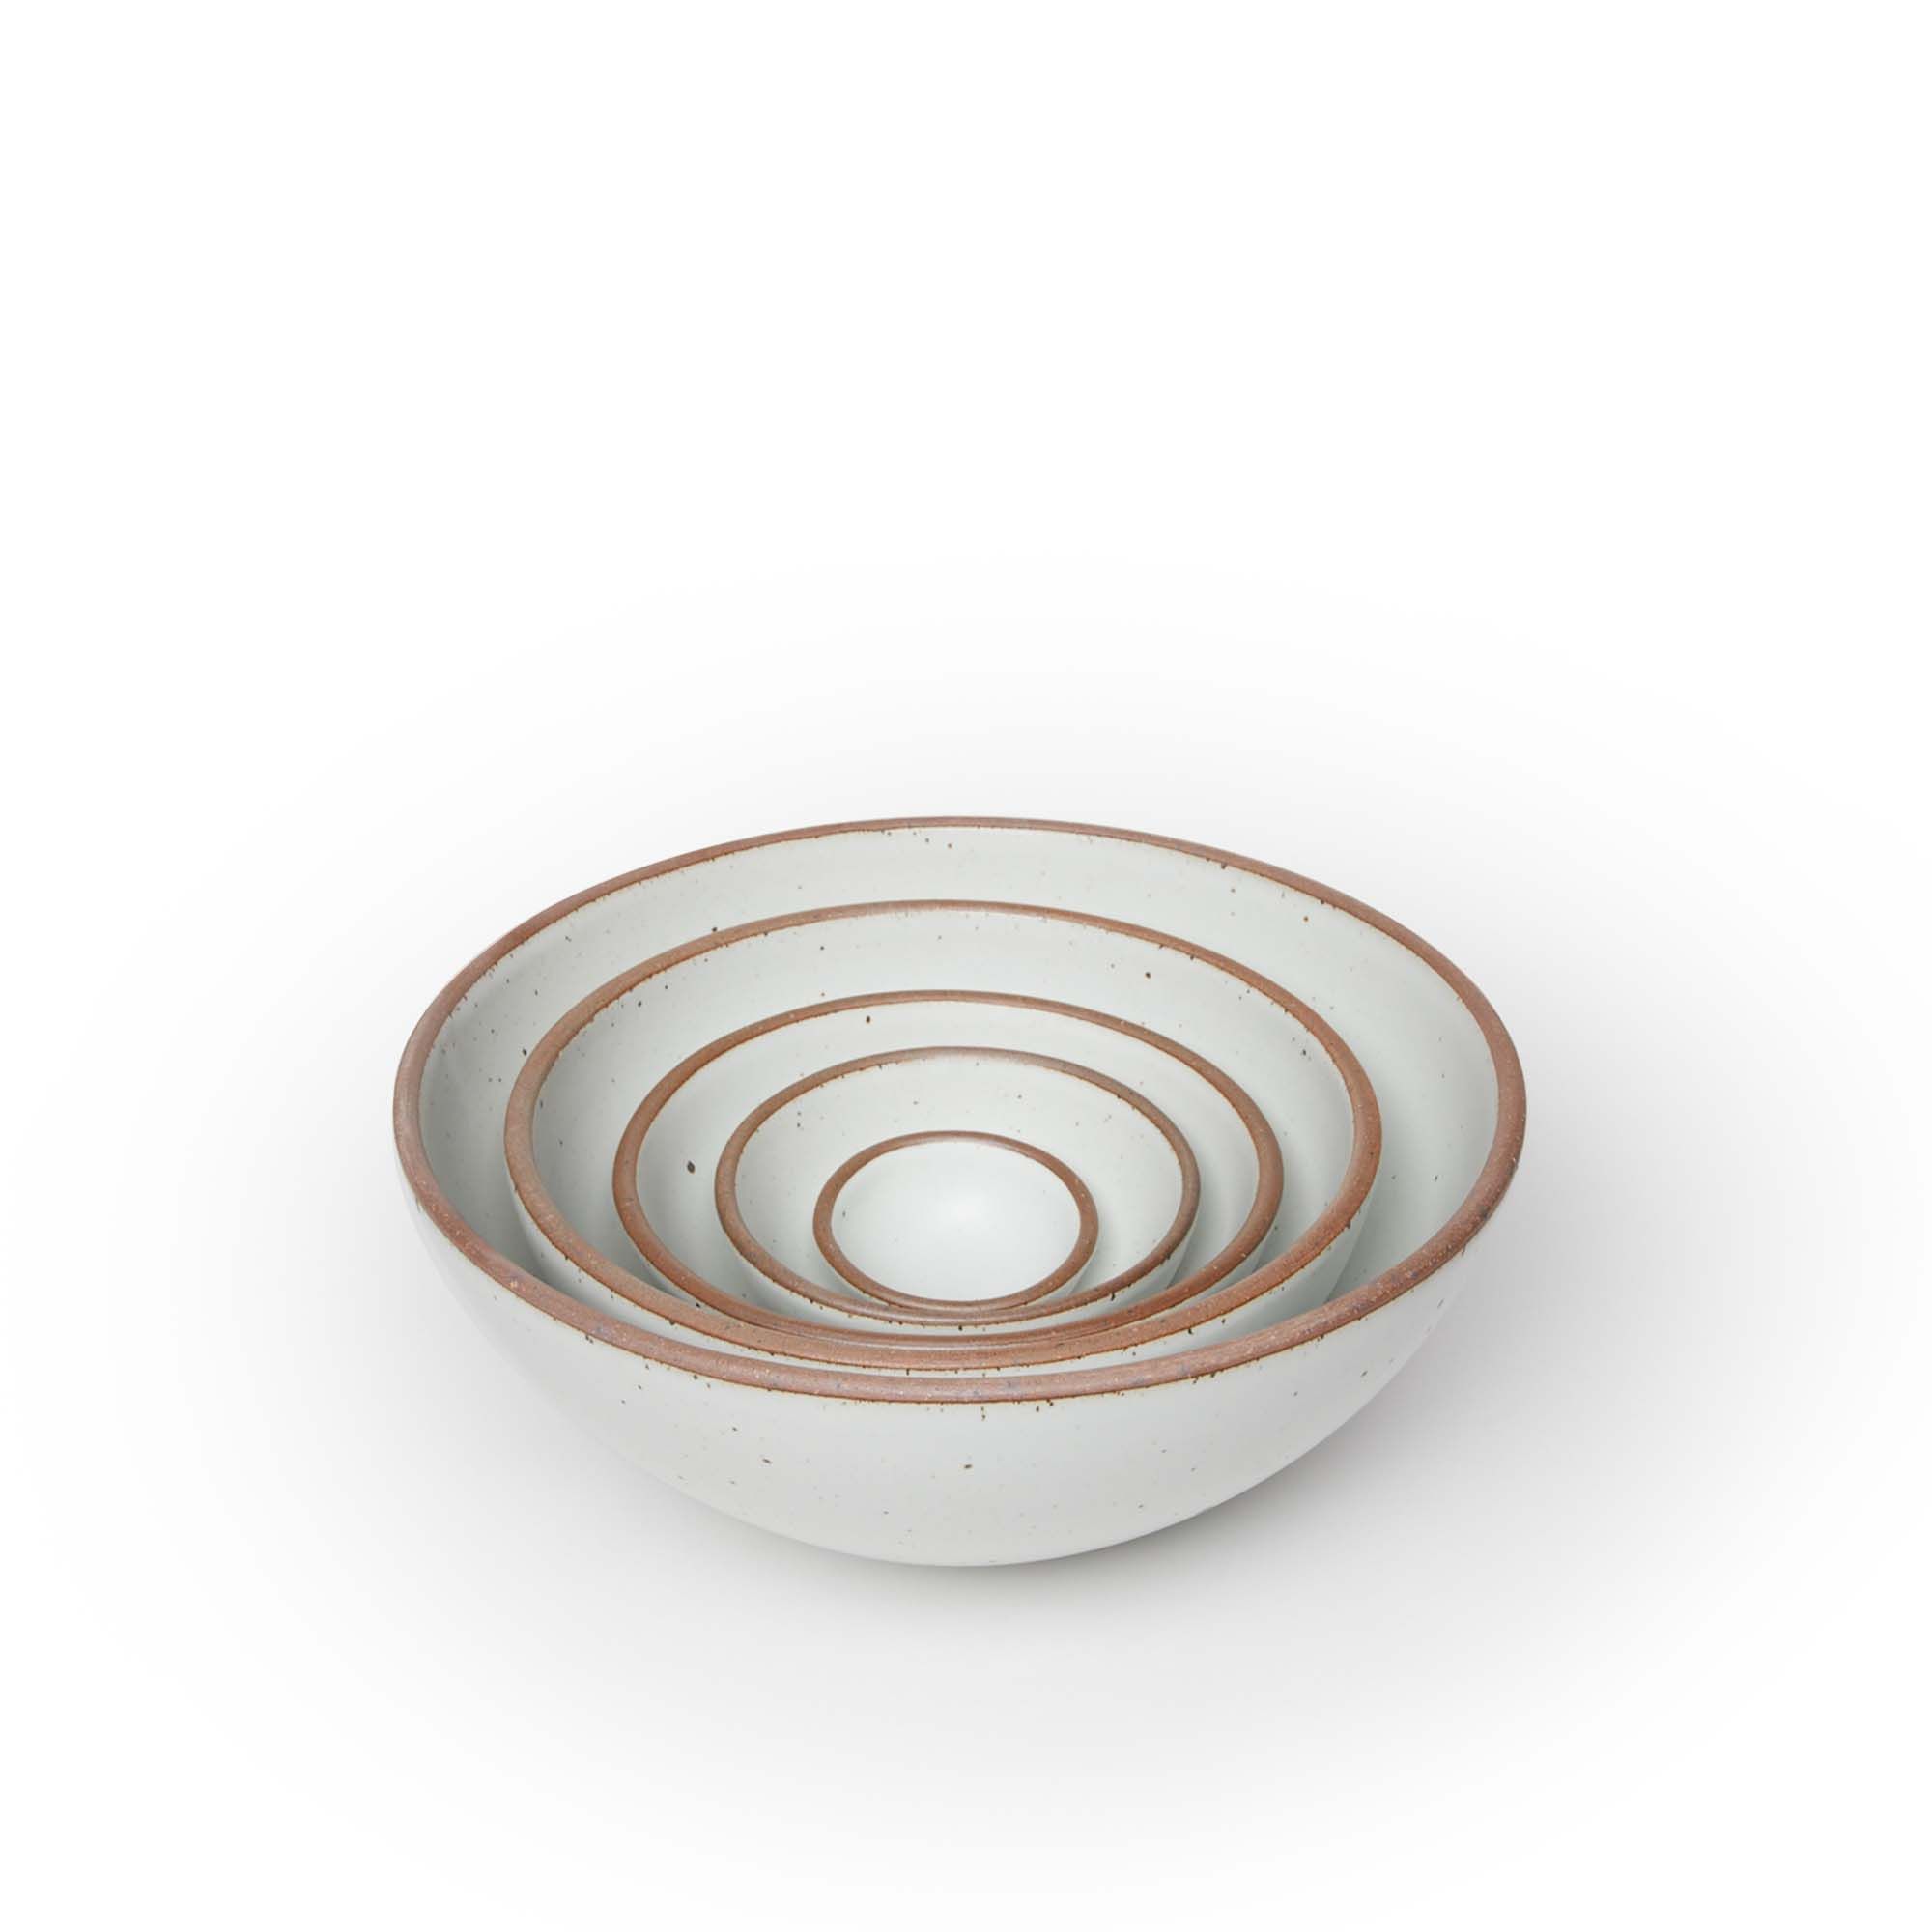 A bitty bowl, ice cream bowl, soup bowl, popcorn bowl, and mixing bowl nesting together in a cool white color featuring iron speckles.